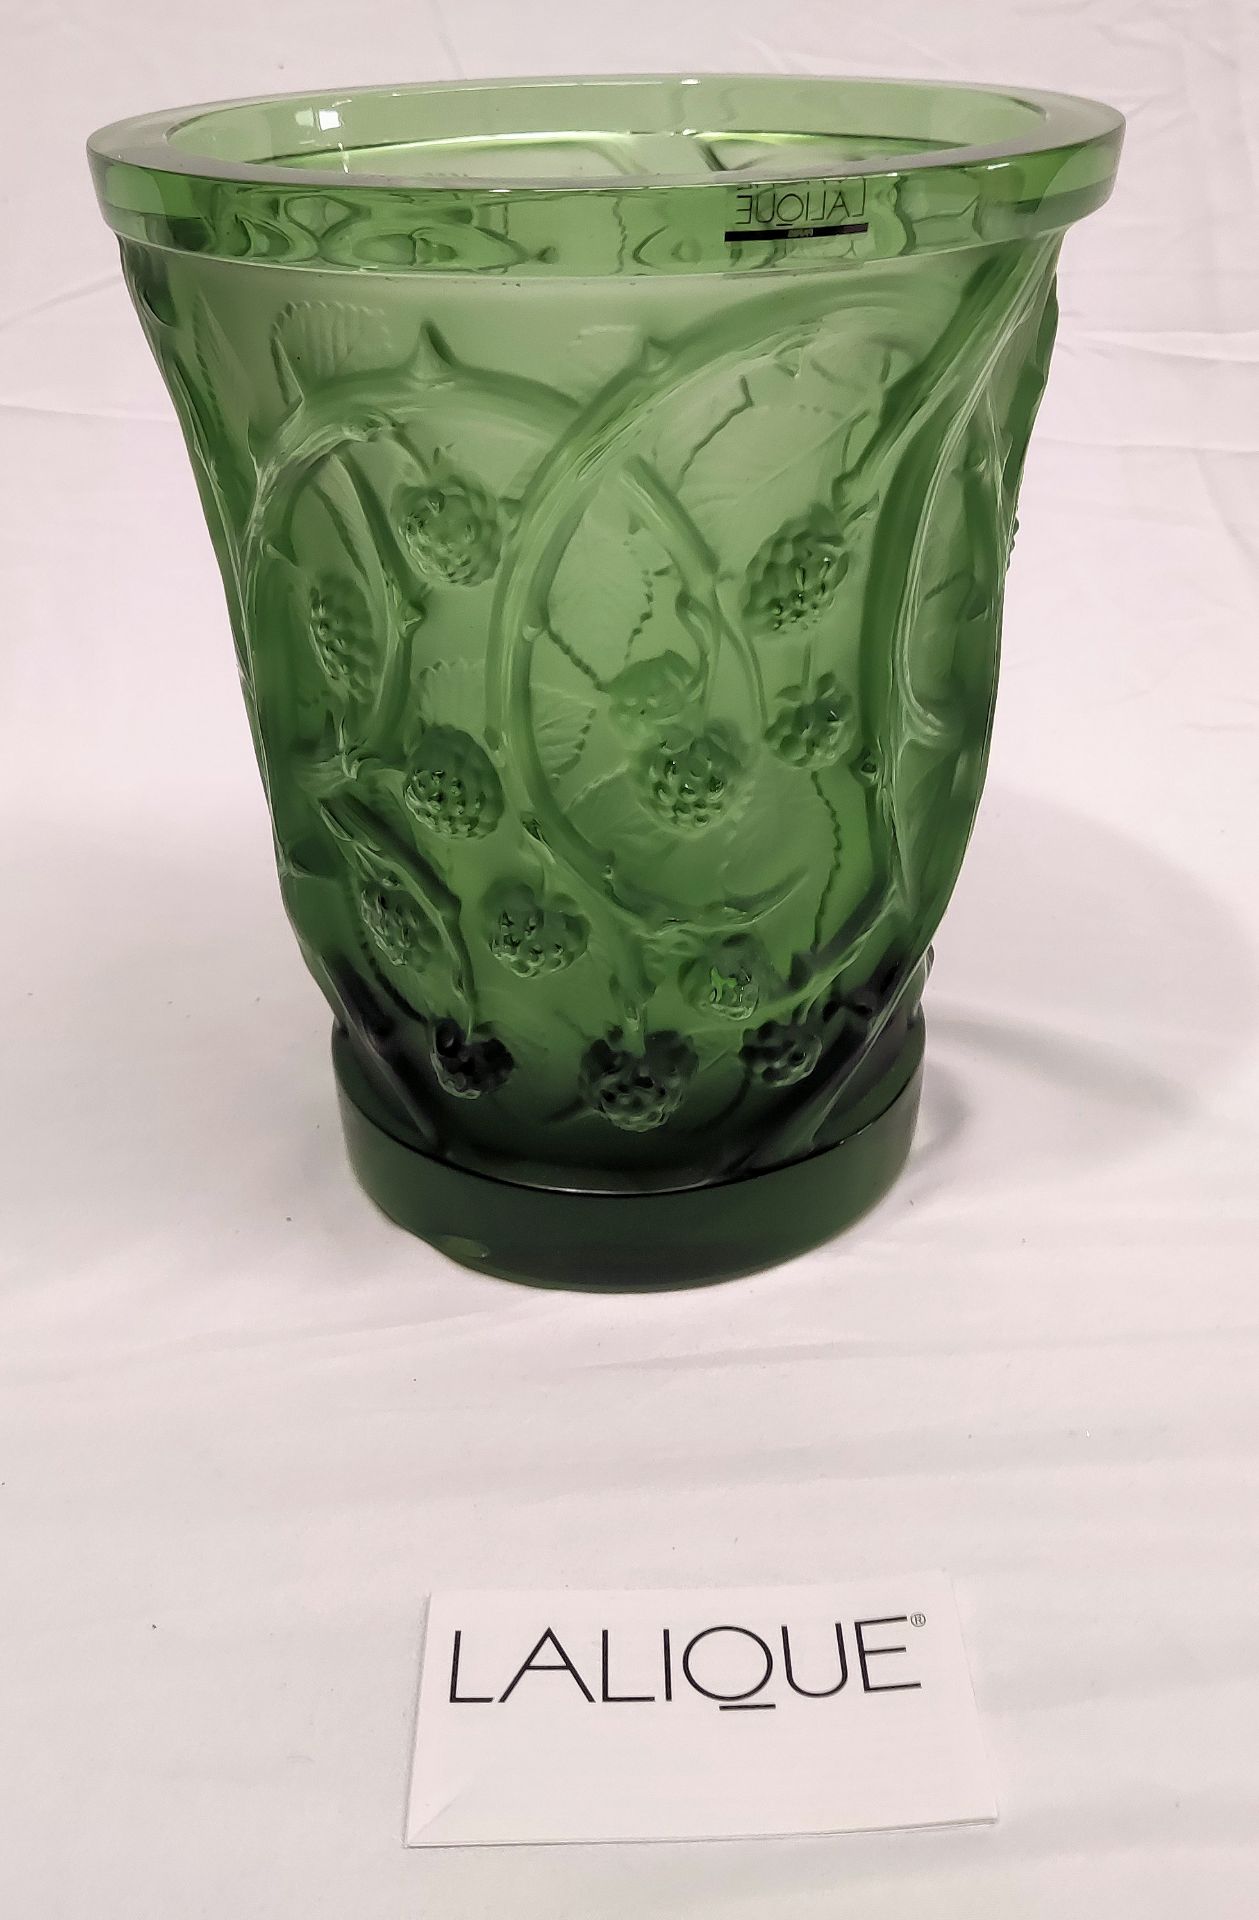 1 x LALIQUE 'Mures' Exquisite Handcrafted French Green Crystal Medium Vase - Original RRP £2,690 - Image 8 of 23